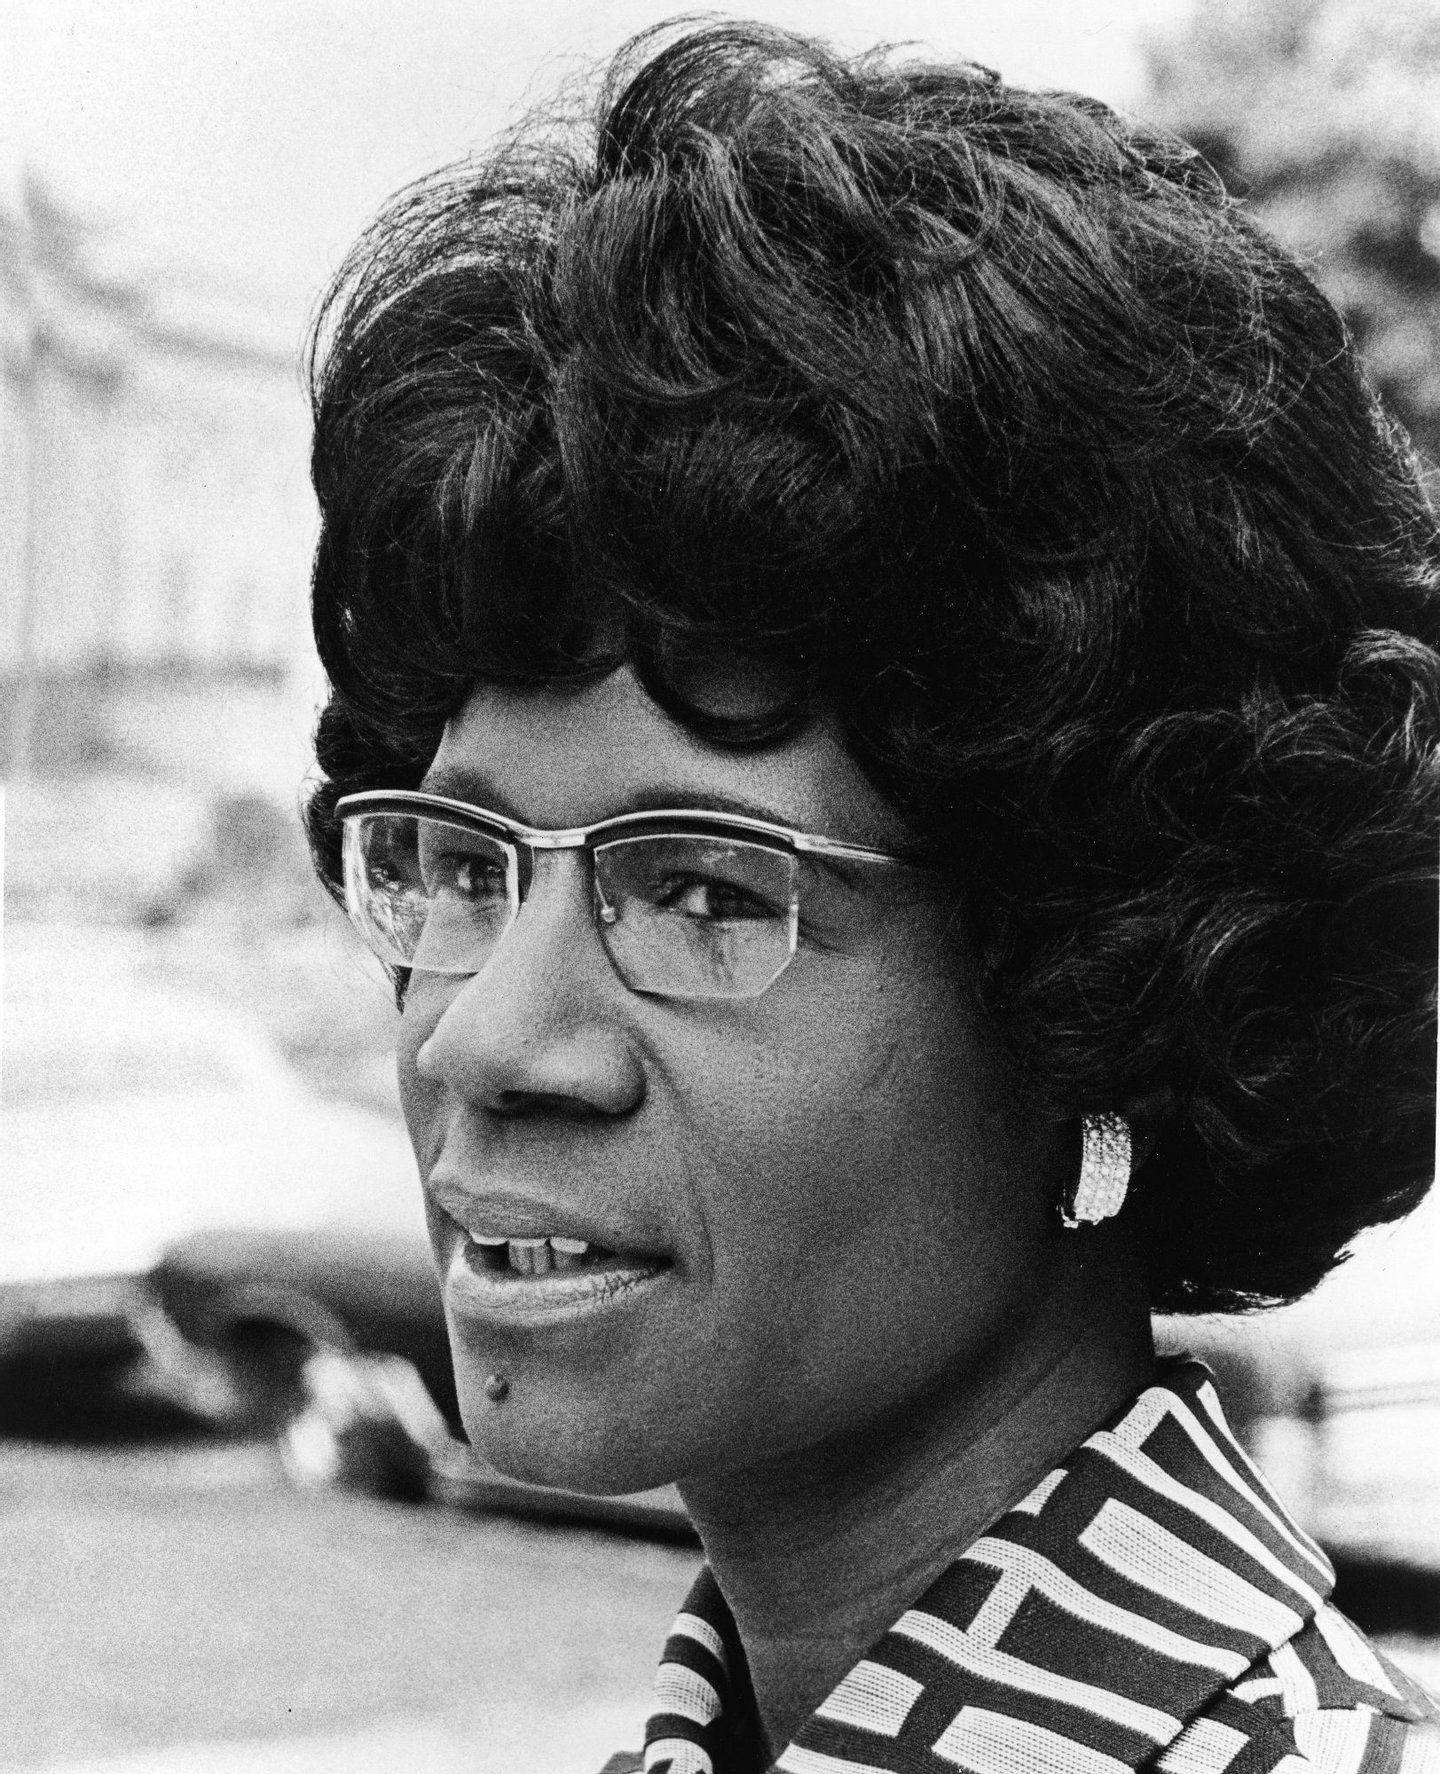 A headshot of African American educator and U.S. Congresswoman Shirley Chisholm, 1973. Chisholm was the first black woman elected to the U.S. Congress and the first woman to run for president in 1971. (Photo by Hulton Archive/Getty Images)